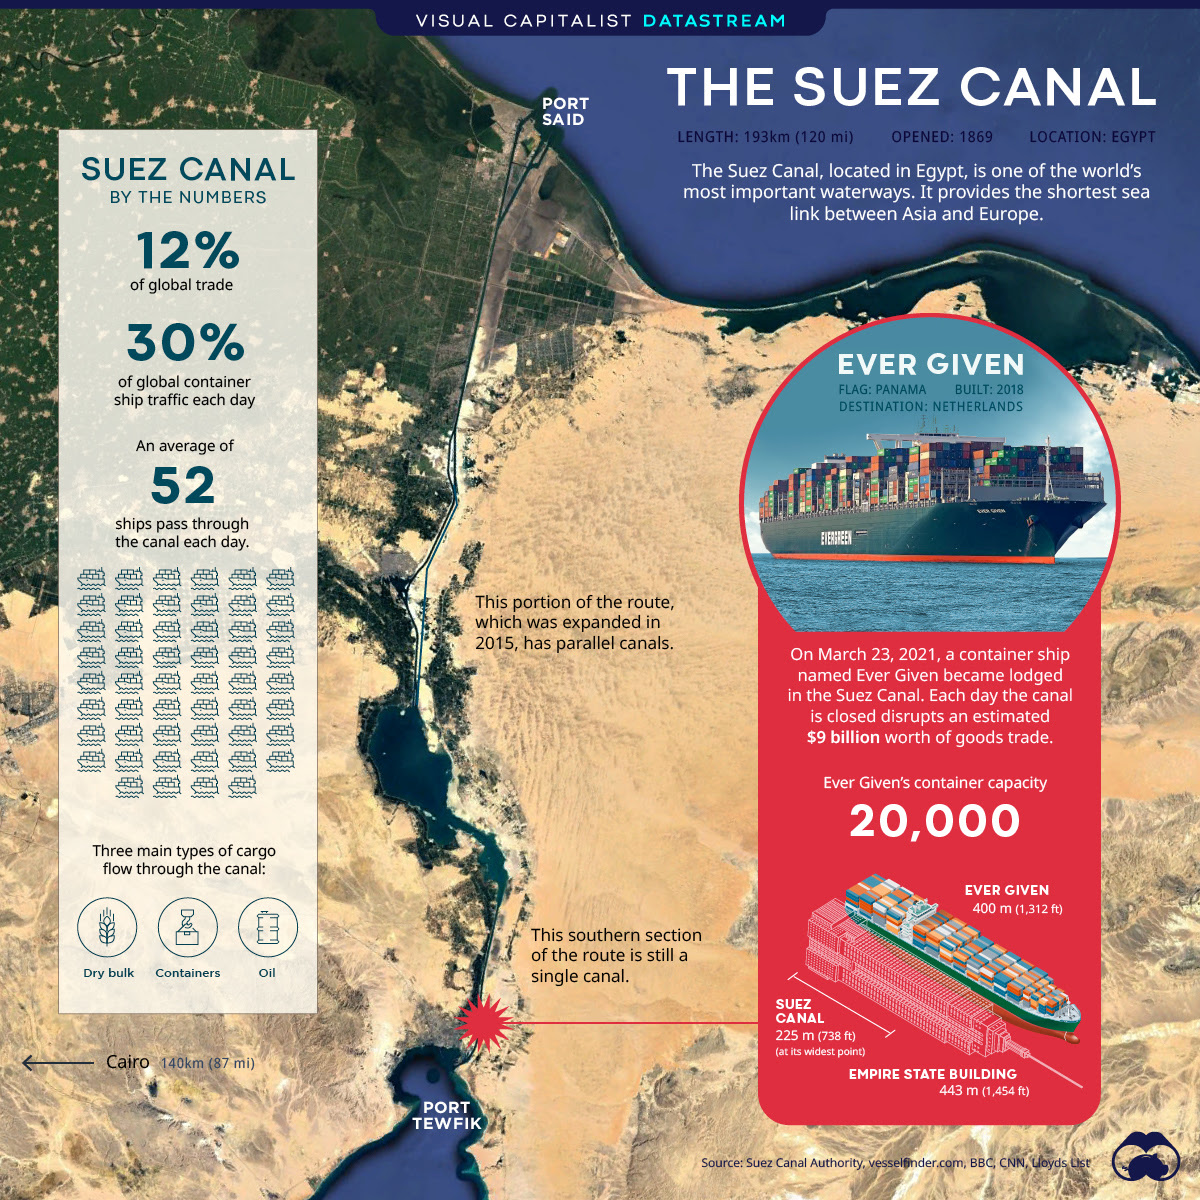 The Suez Canal: A Critical Waterway Comes to a Halt